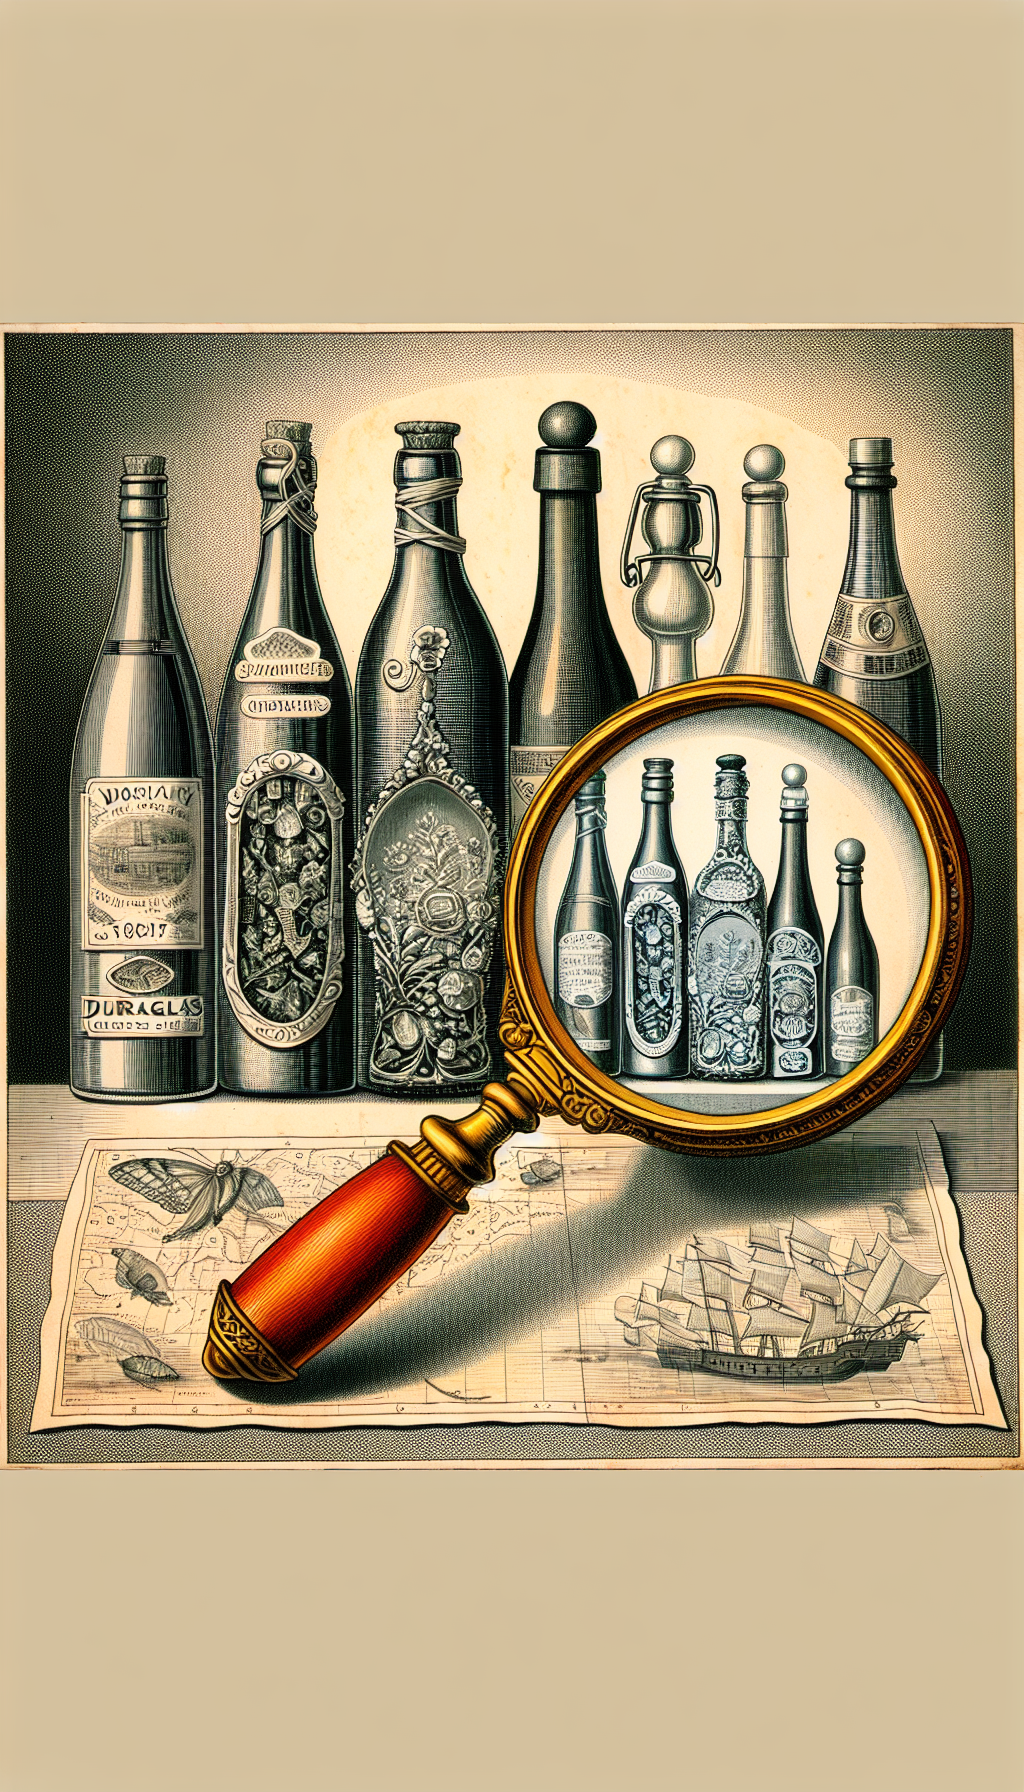 An opulent still-life illustration depicts a magnifying glass resting atop a vintage map, revealing diverse Duraglas bottles that morph from plain to ornate under its lens. Behind the glass, the bottles sparkle, intricately etched with factors like rarity and age, symbolizing their ascent in value, while outside the glass, they remain common and undistinguished.